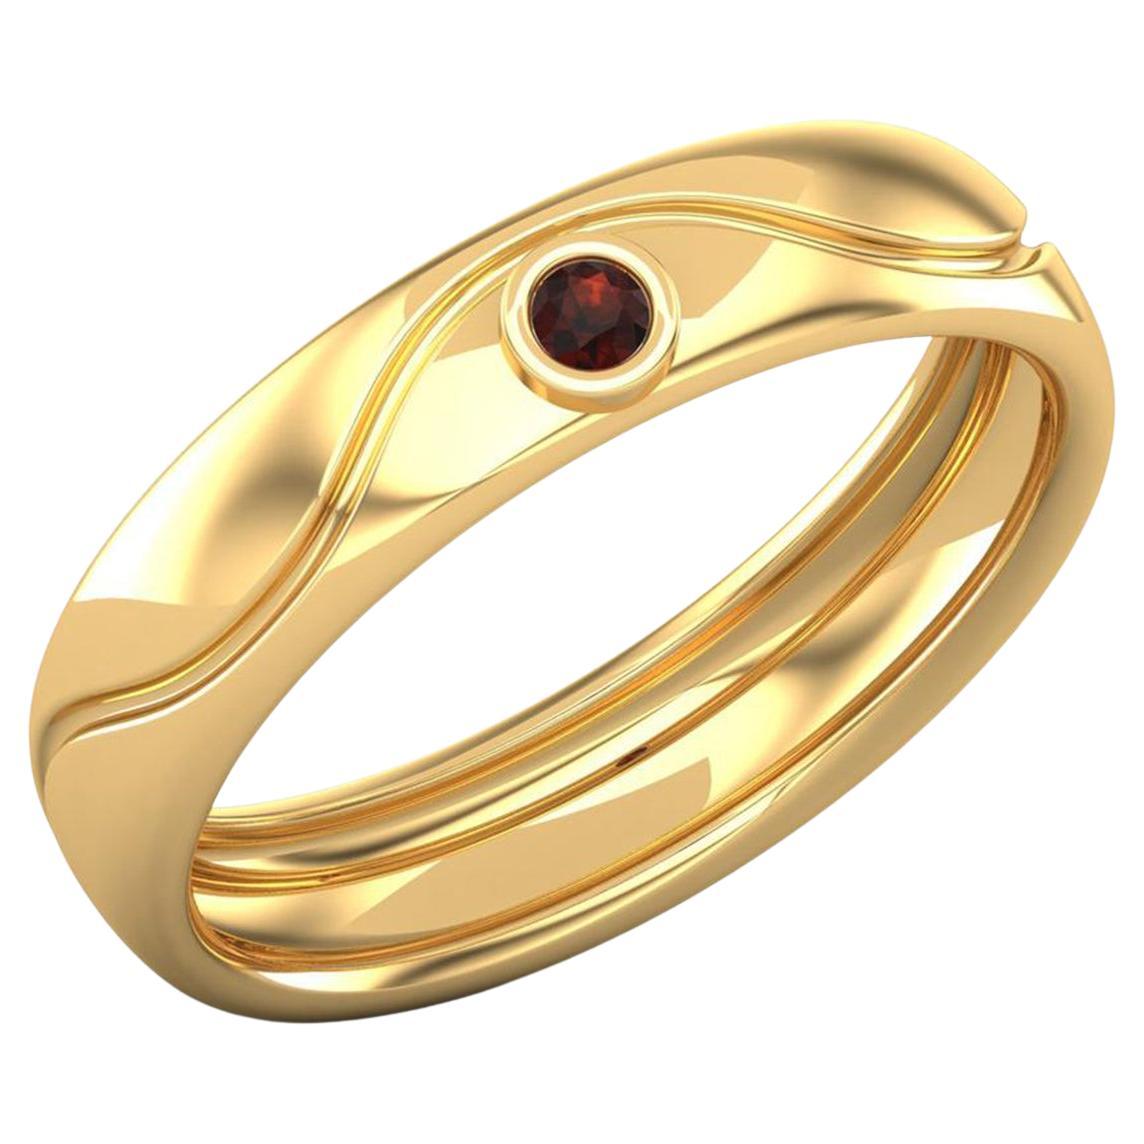 14 K Gold Garnet Ring / Engagement Ring / Ring for Her / January Birthstone Band For Sale